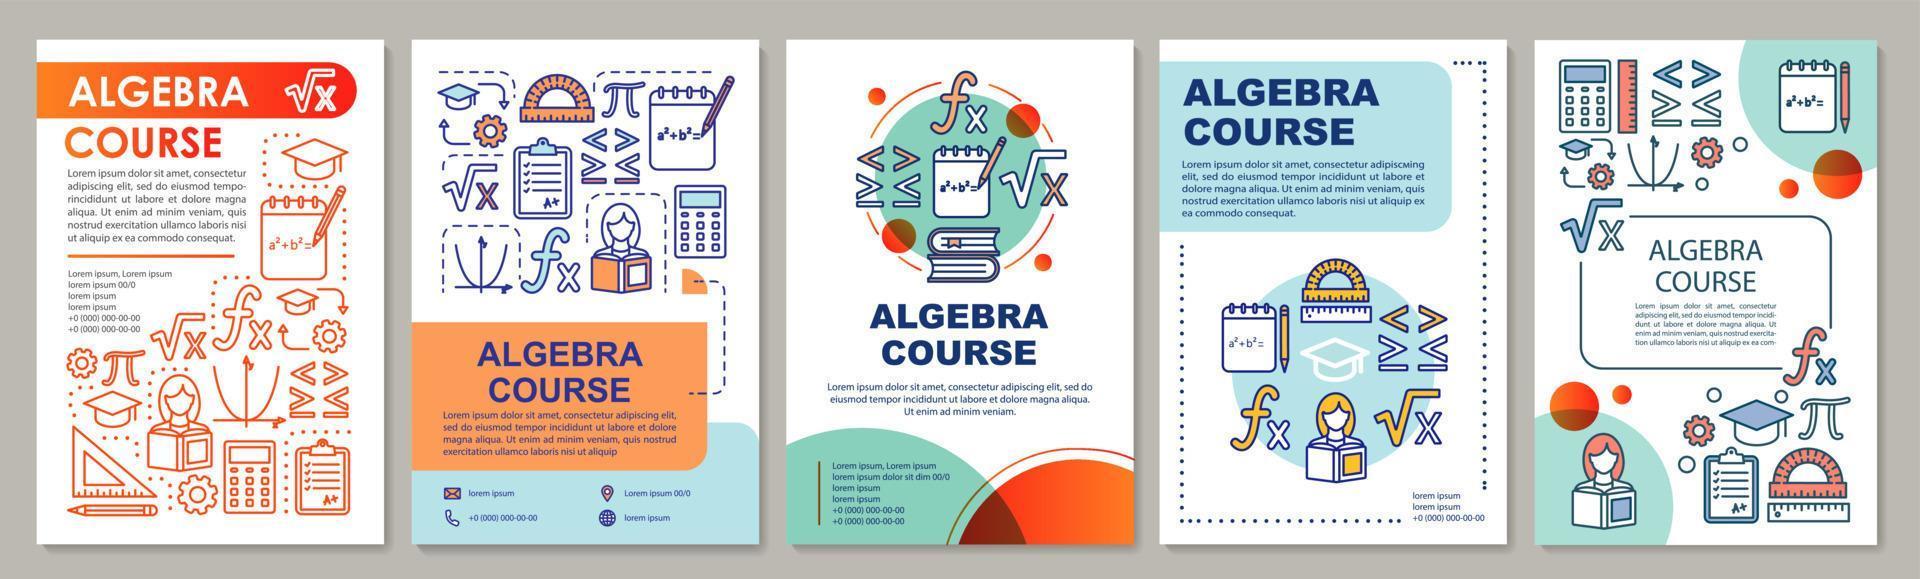 Algebra course, math lessons brochure template layout. Flyer, booklet, leaflet print design with linear illustrations. Vector page layouts for magazines, annual reports, advertising posters..